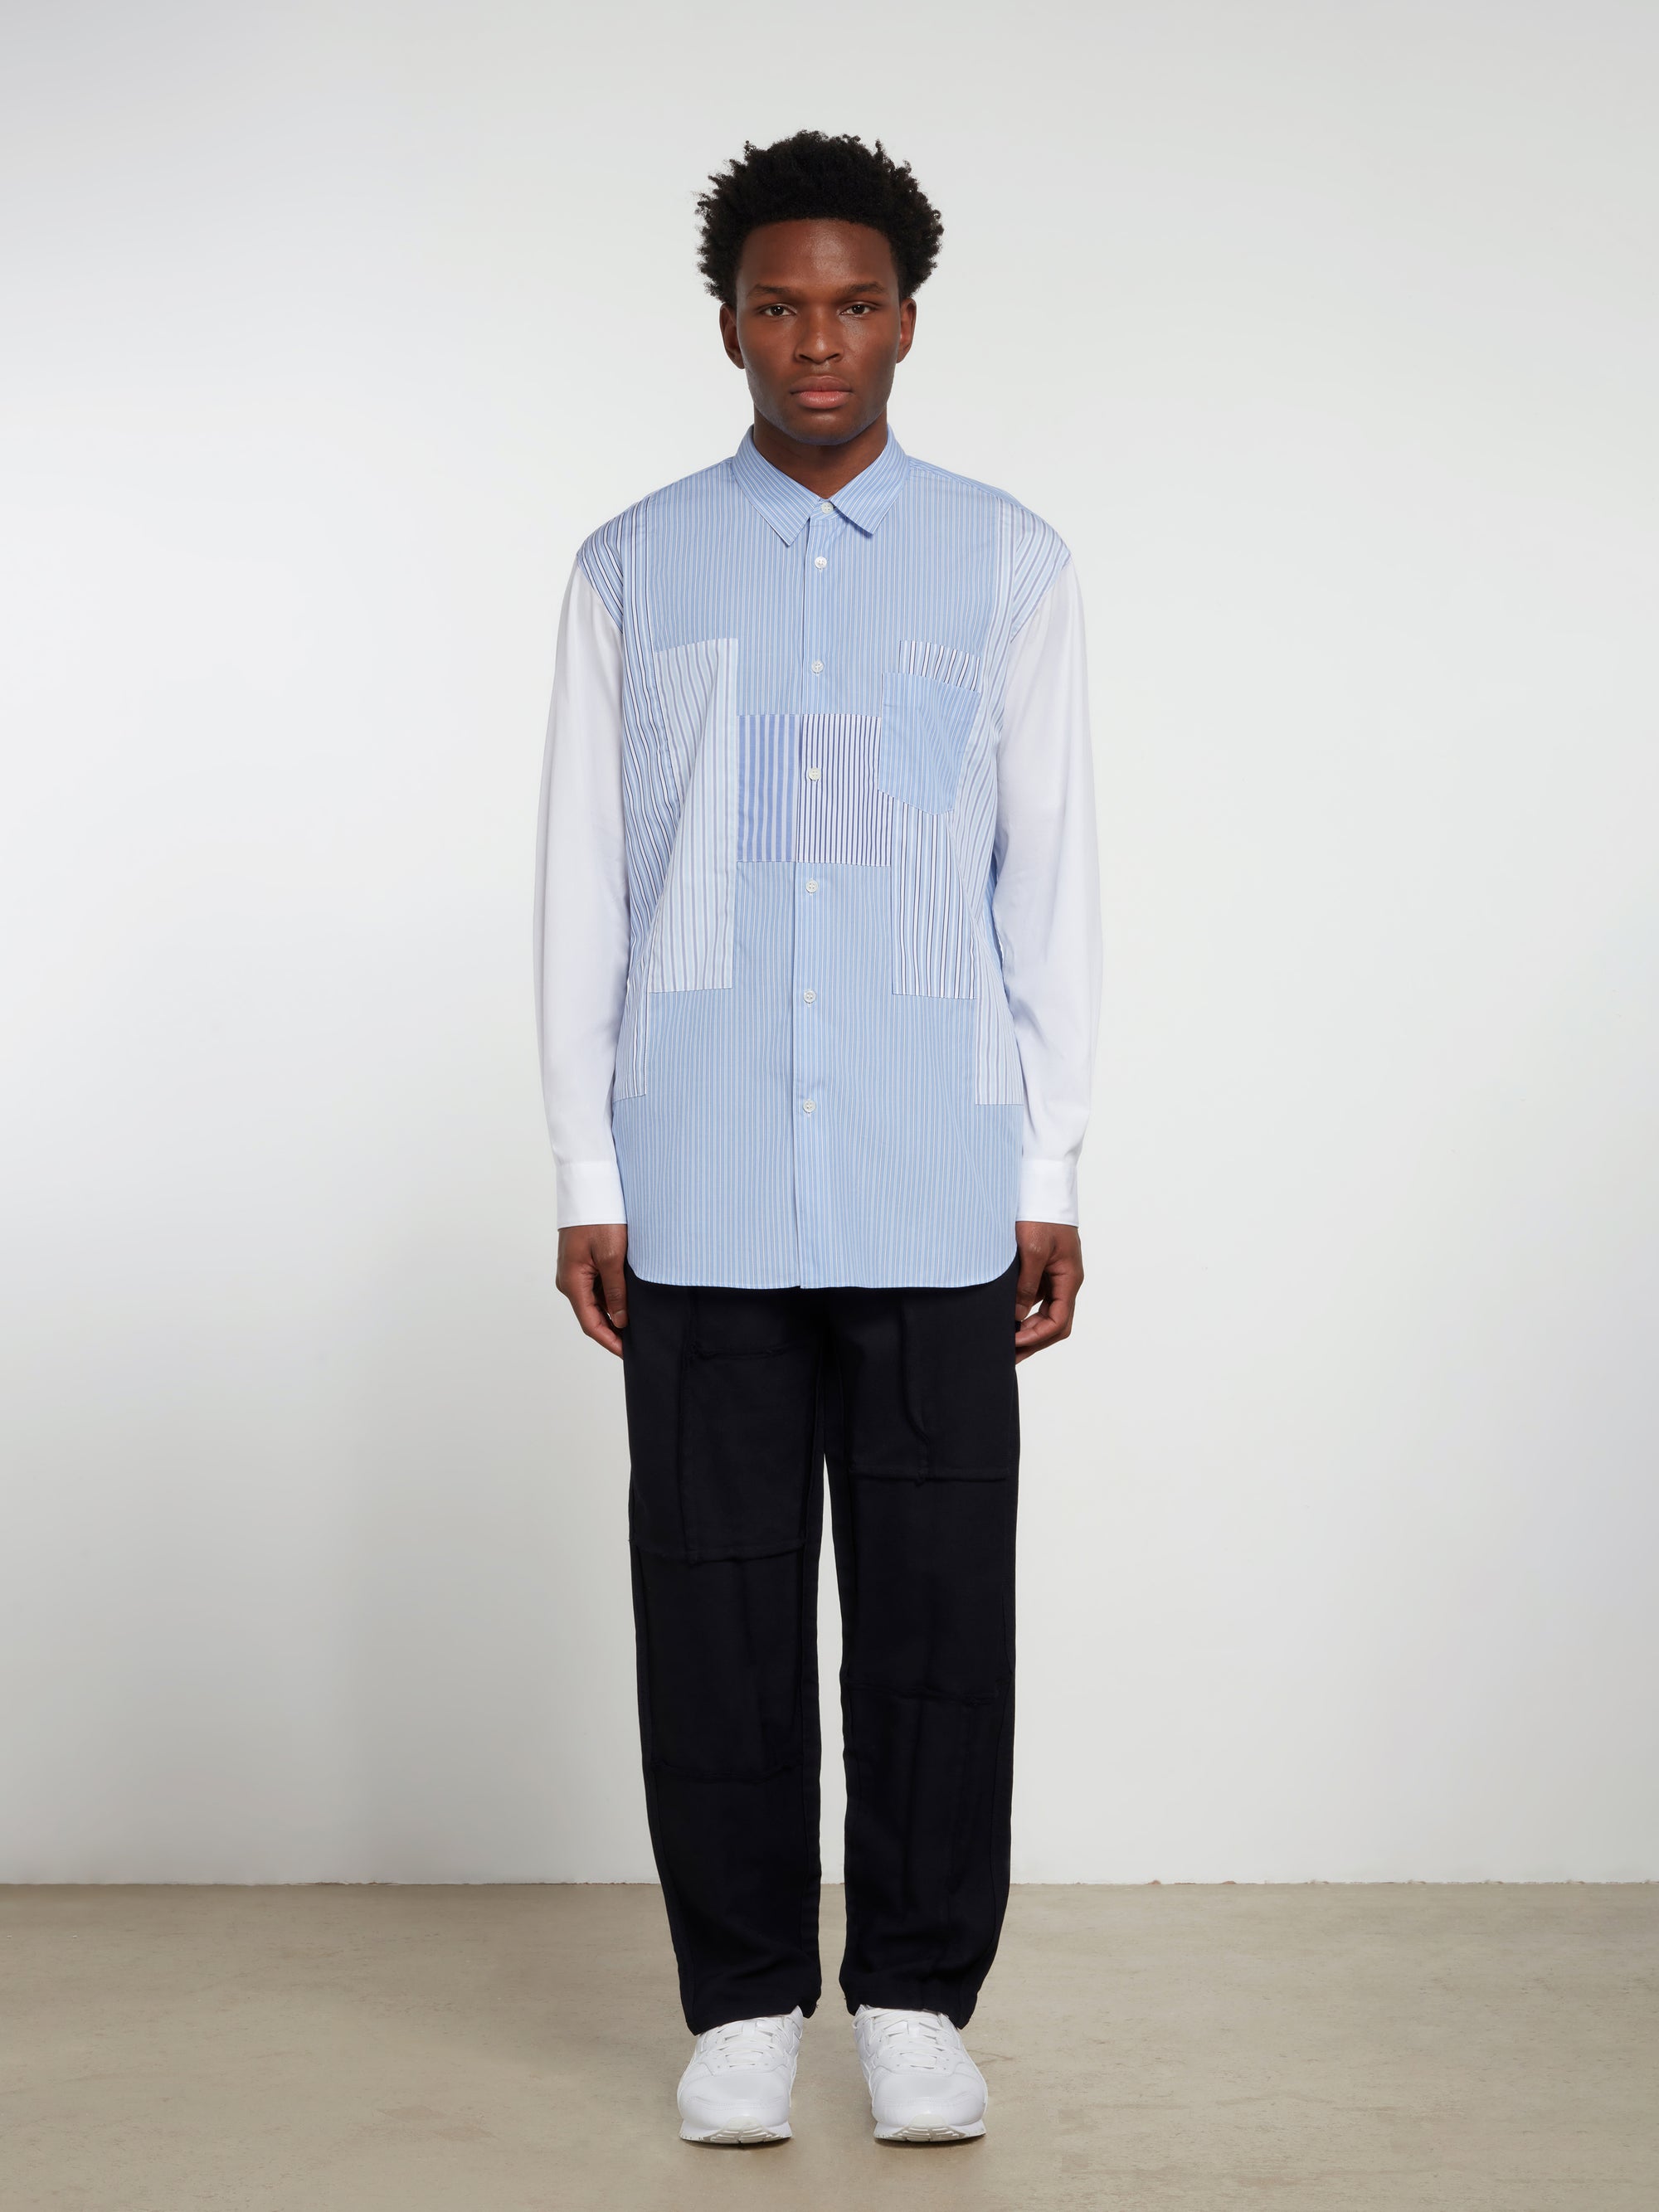 CDG Shirt Forever - Classic Fit Contrast Patchwork Stripe Shirt - (Stripe/Mix) view 5